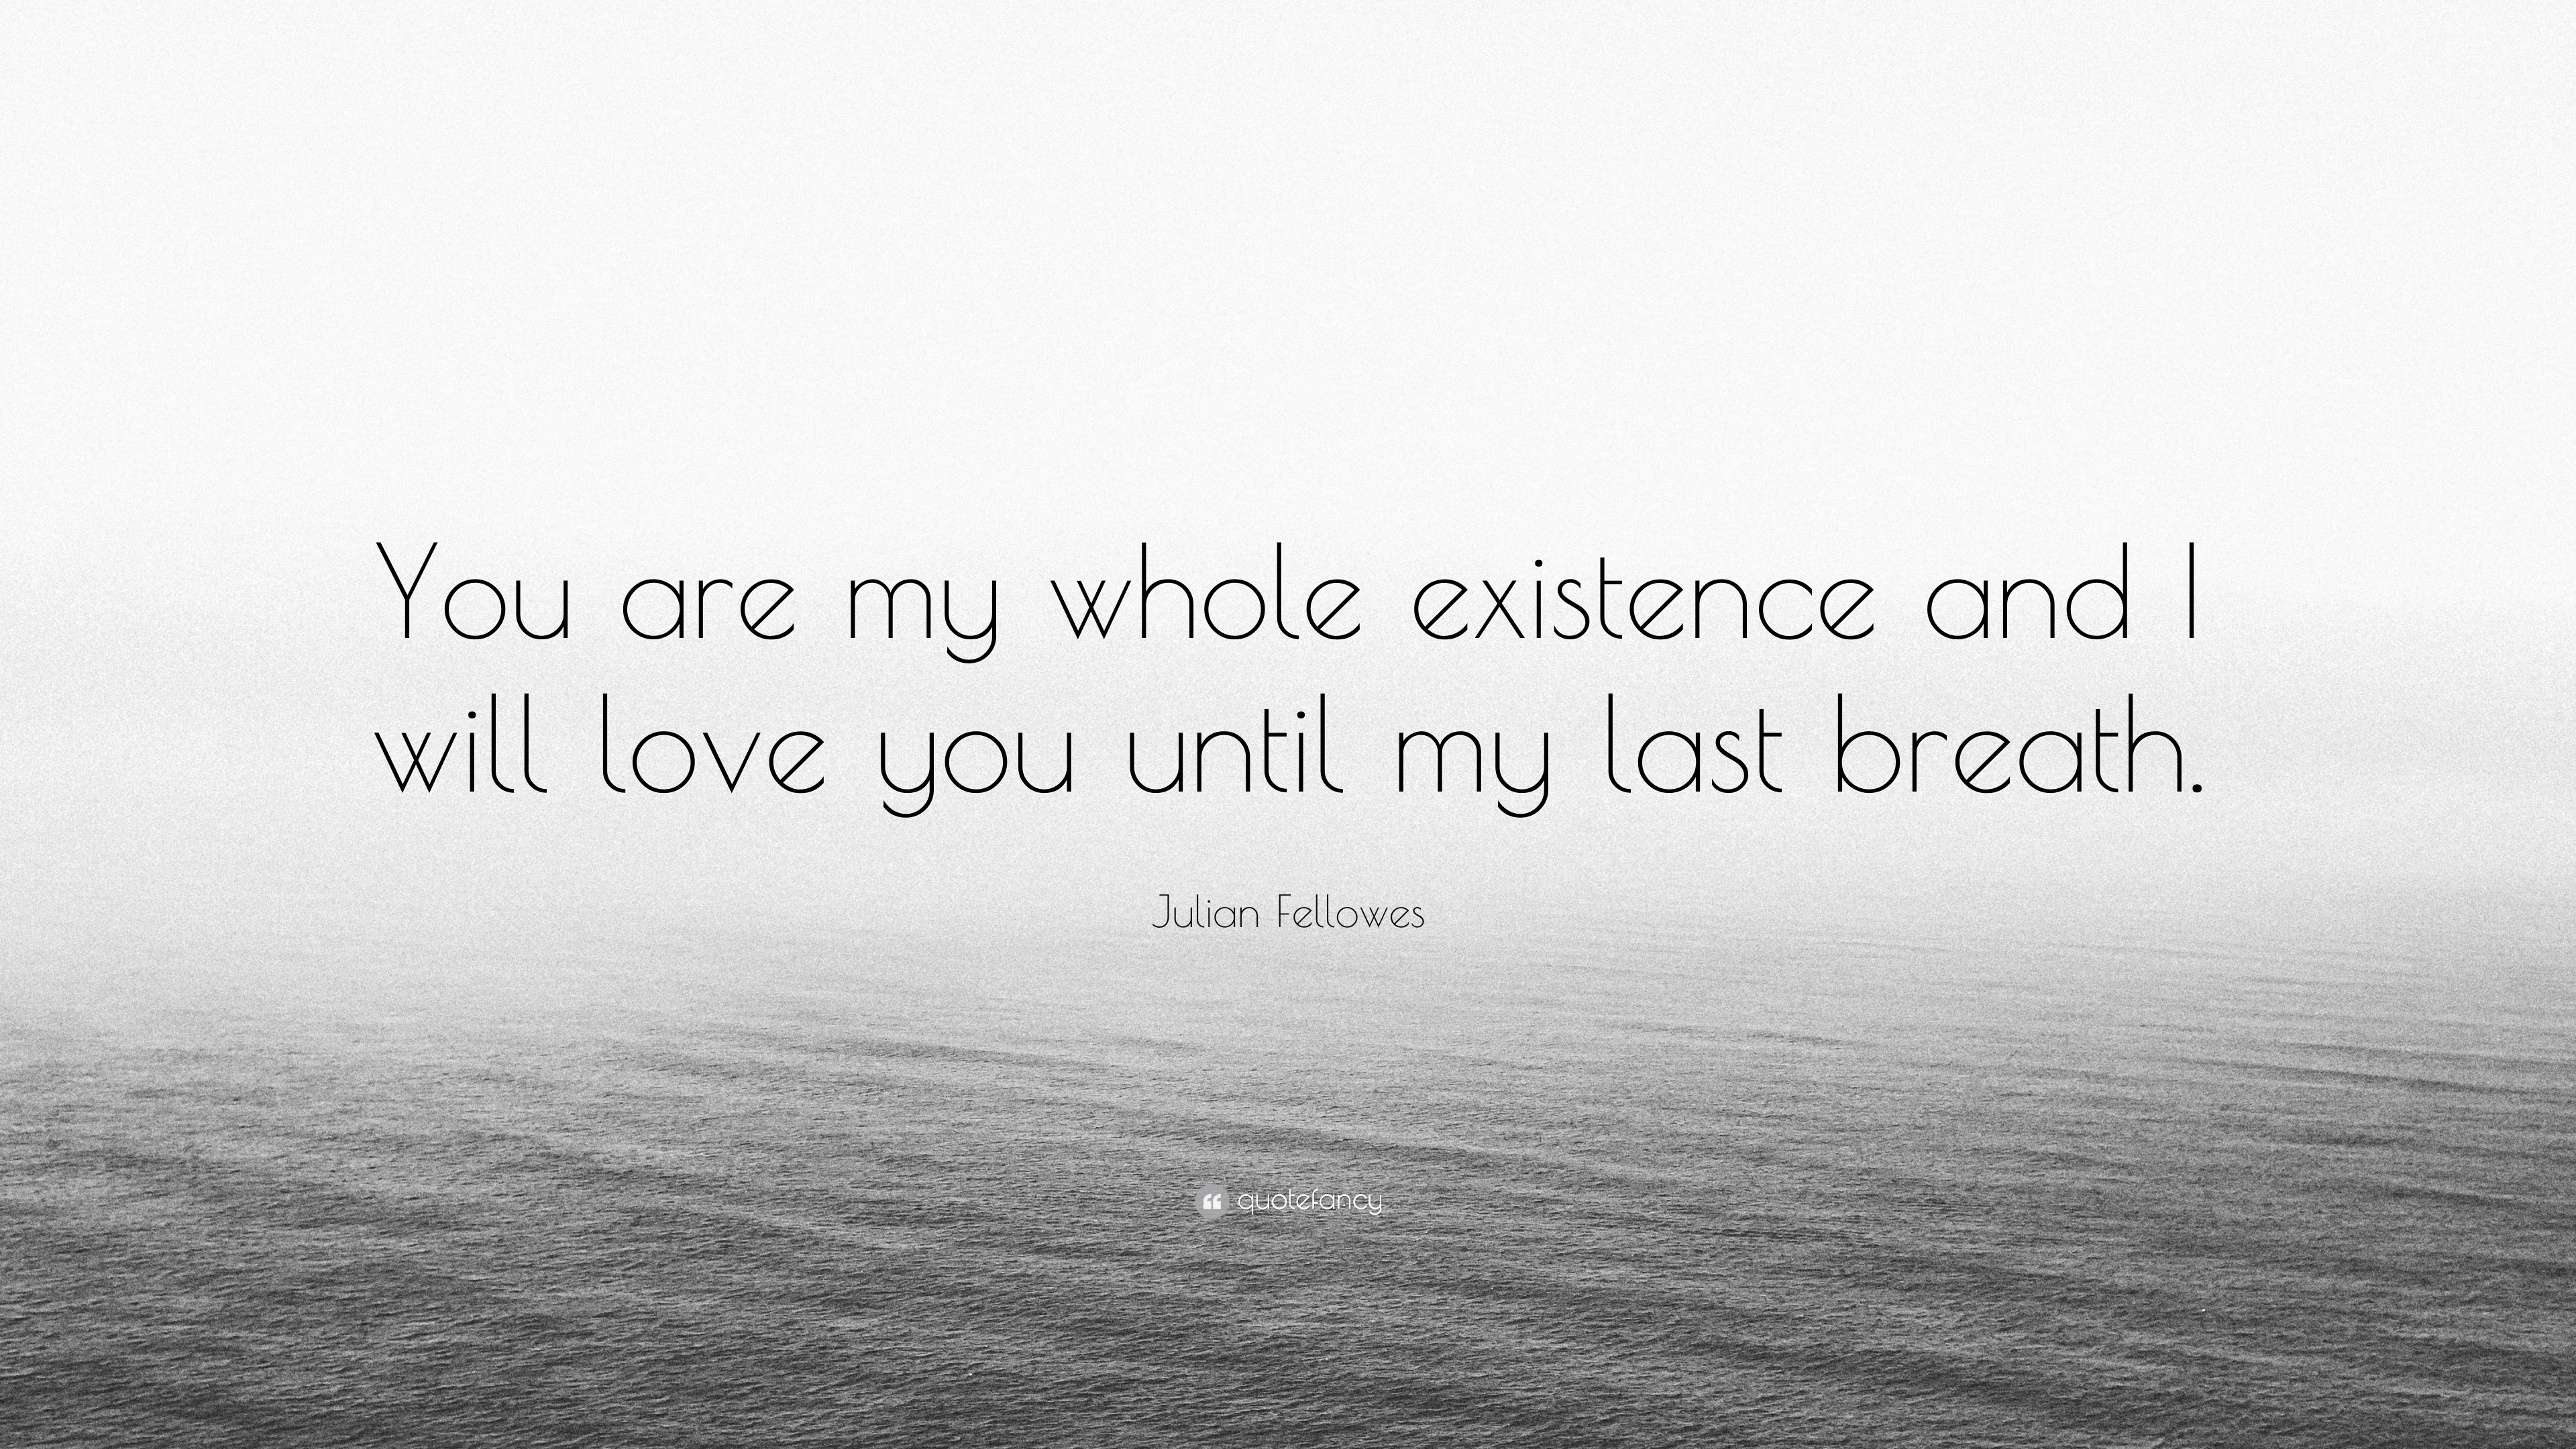 Julian Fellowes Quote “You are my whole existence and I will love you until